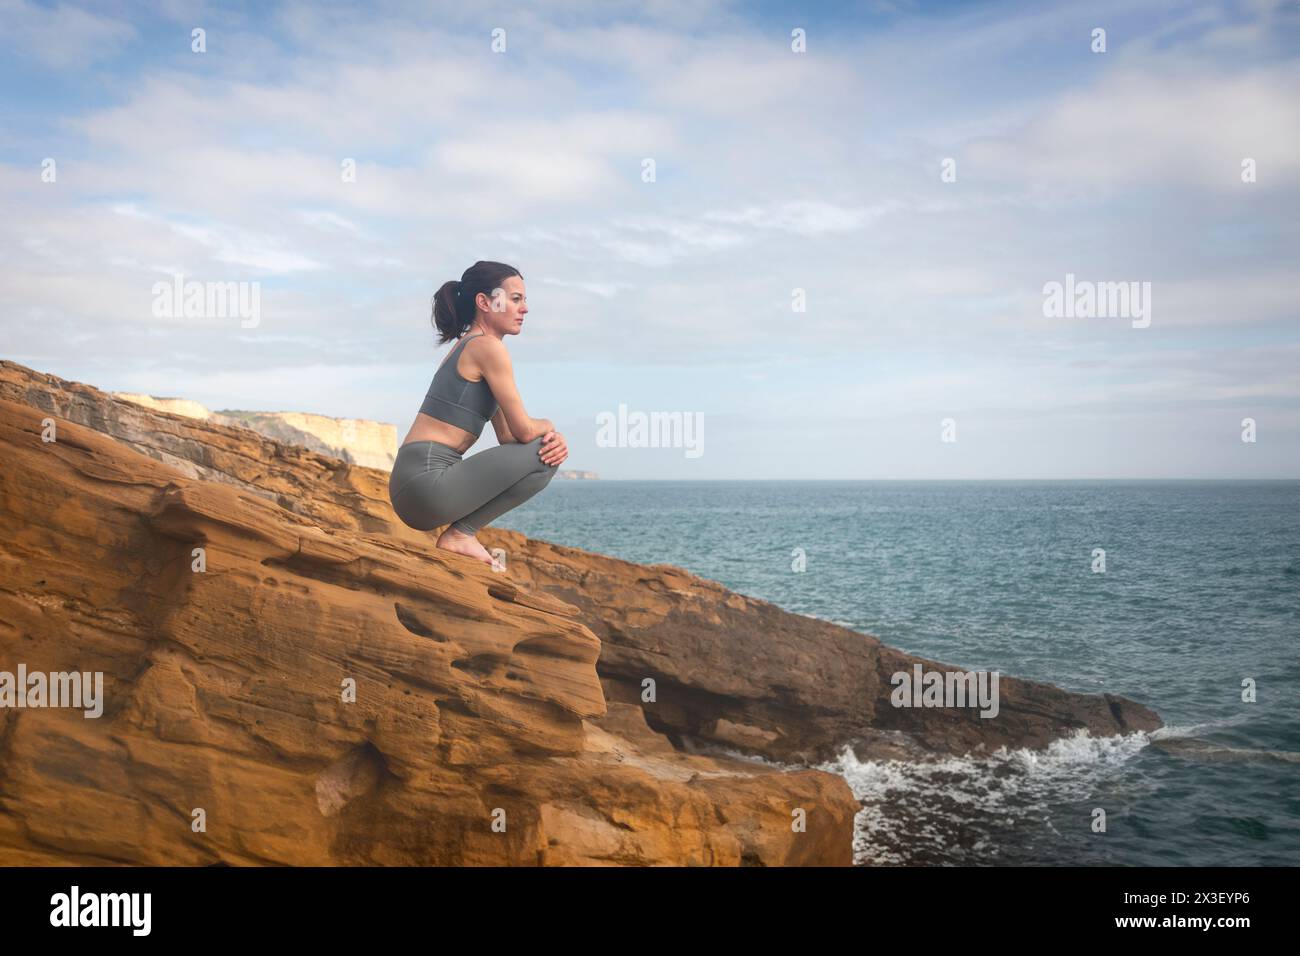 Sporty woman sitting on a rock looking out to sea, de-stressing after workout or yoga Stock Photo